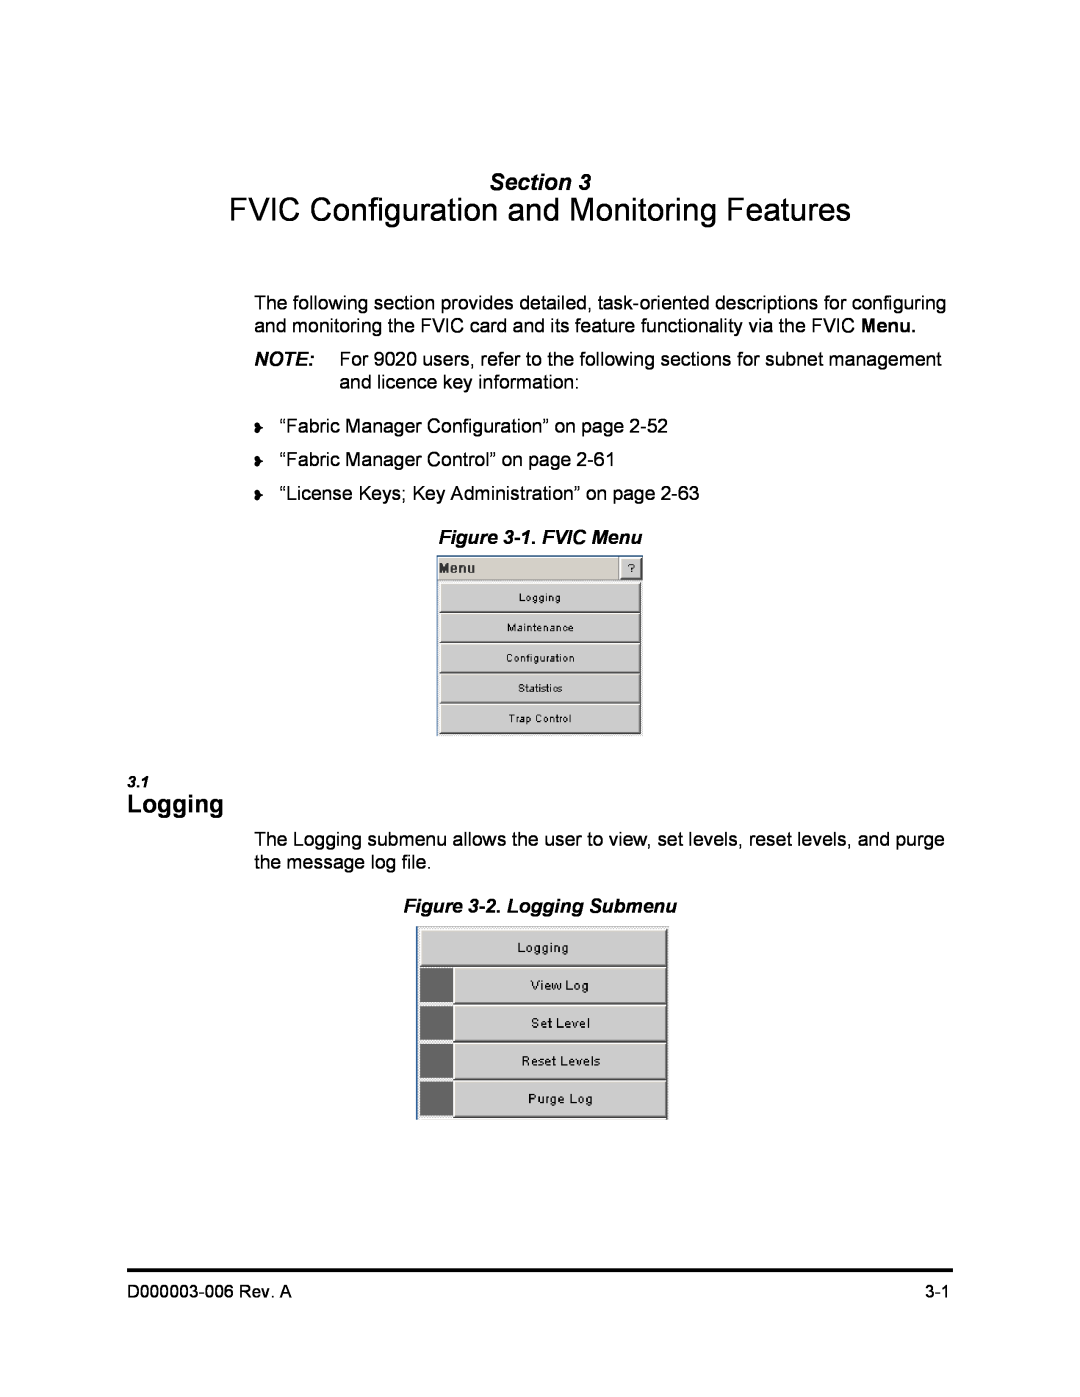 Q-Logic 9000 manual FVIC Configuration and Monitoring Features, 1. FVIC Menu, 2. Logging Submenu, Section 